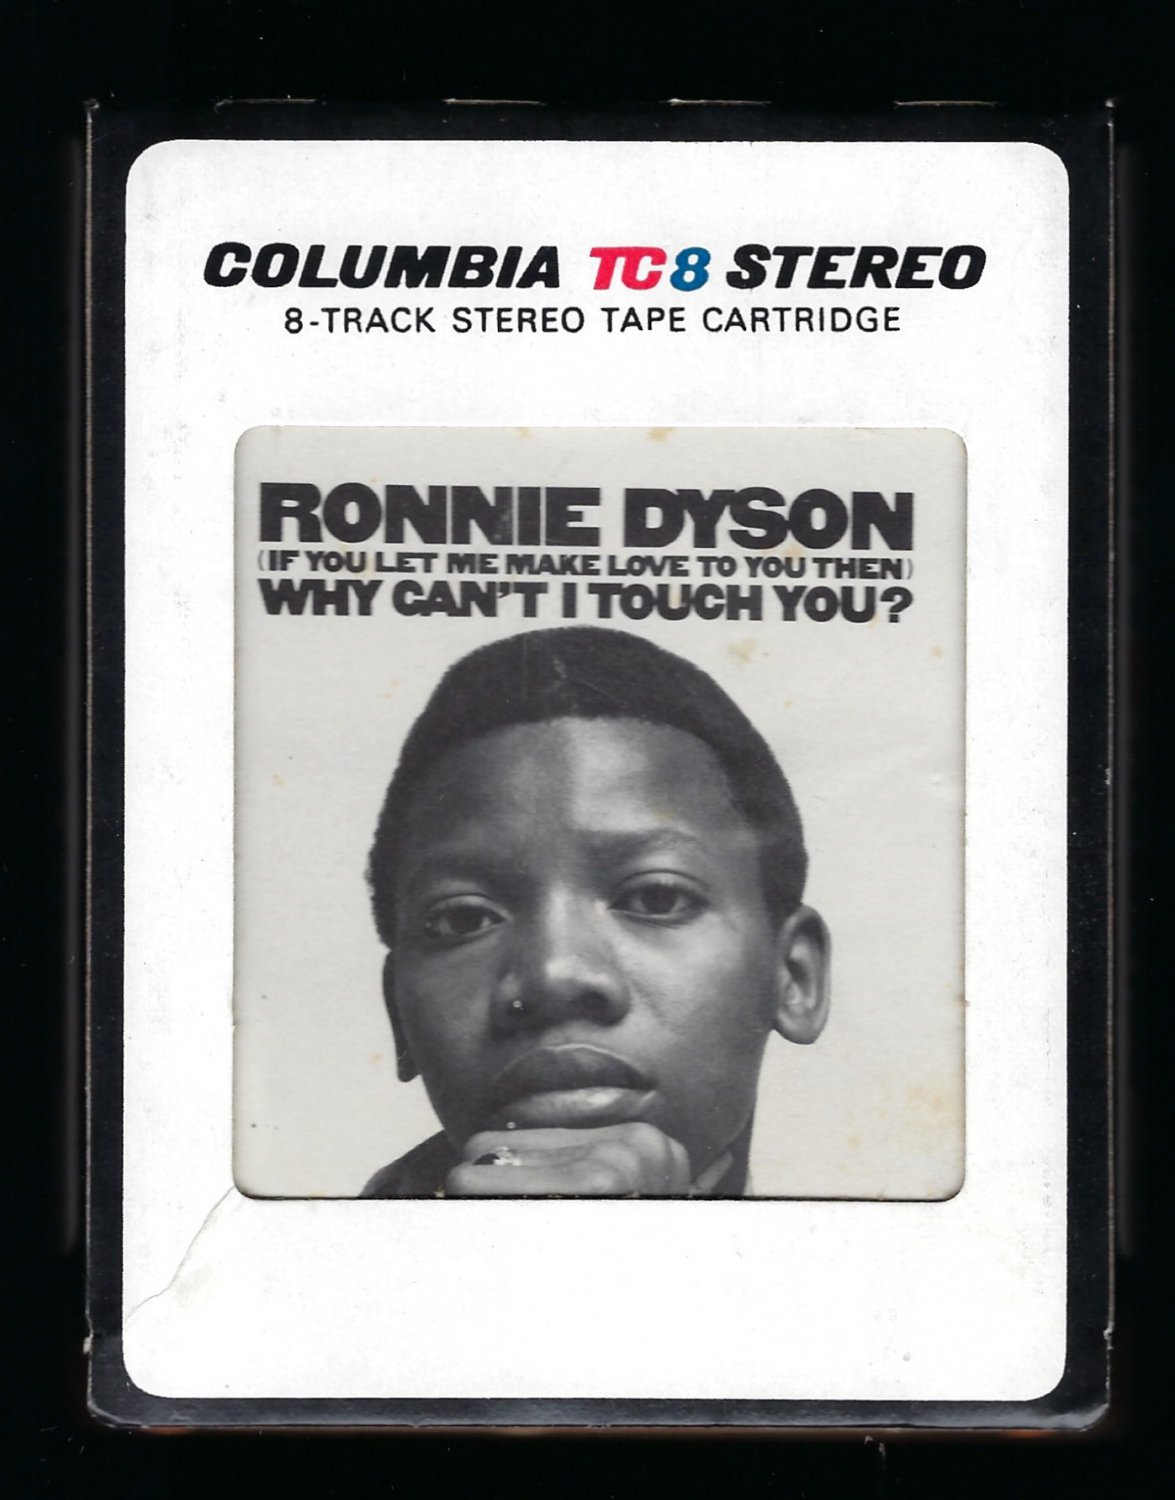 Ronnie Dyson - Why Can't I Touch You? 1970 CBS T11 8-TRACK TAPE